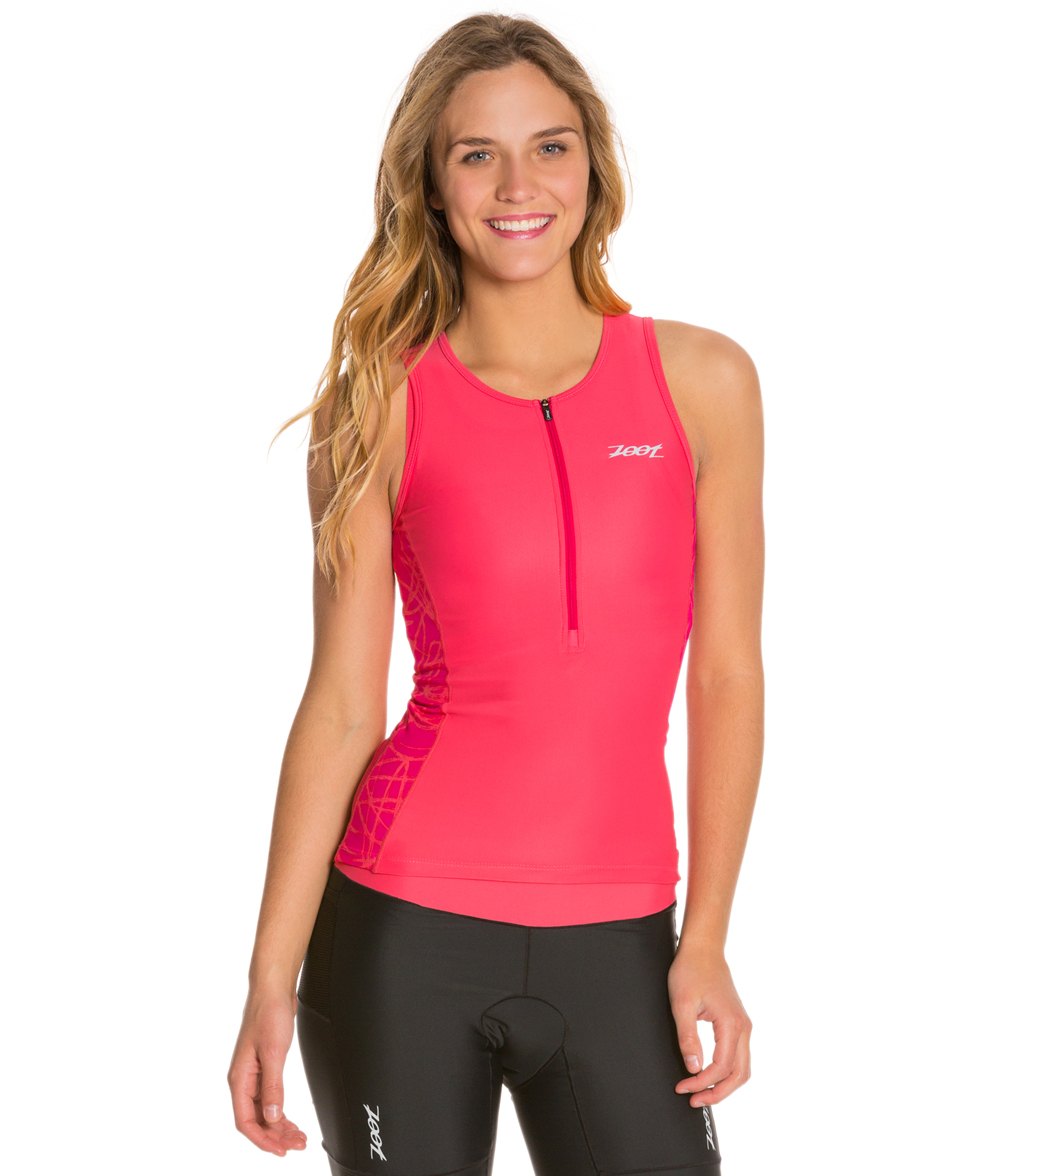 Zoot Women's Performance Tri Tank at SwimOutlet.com - Free Shipping